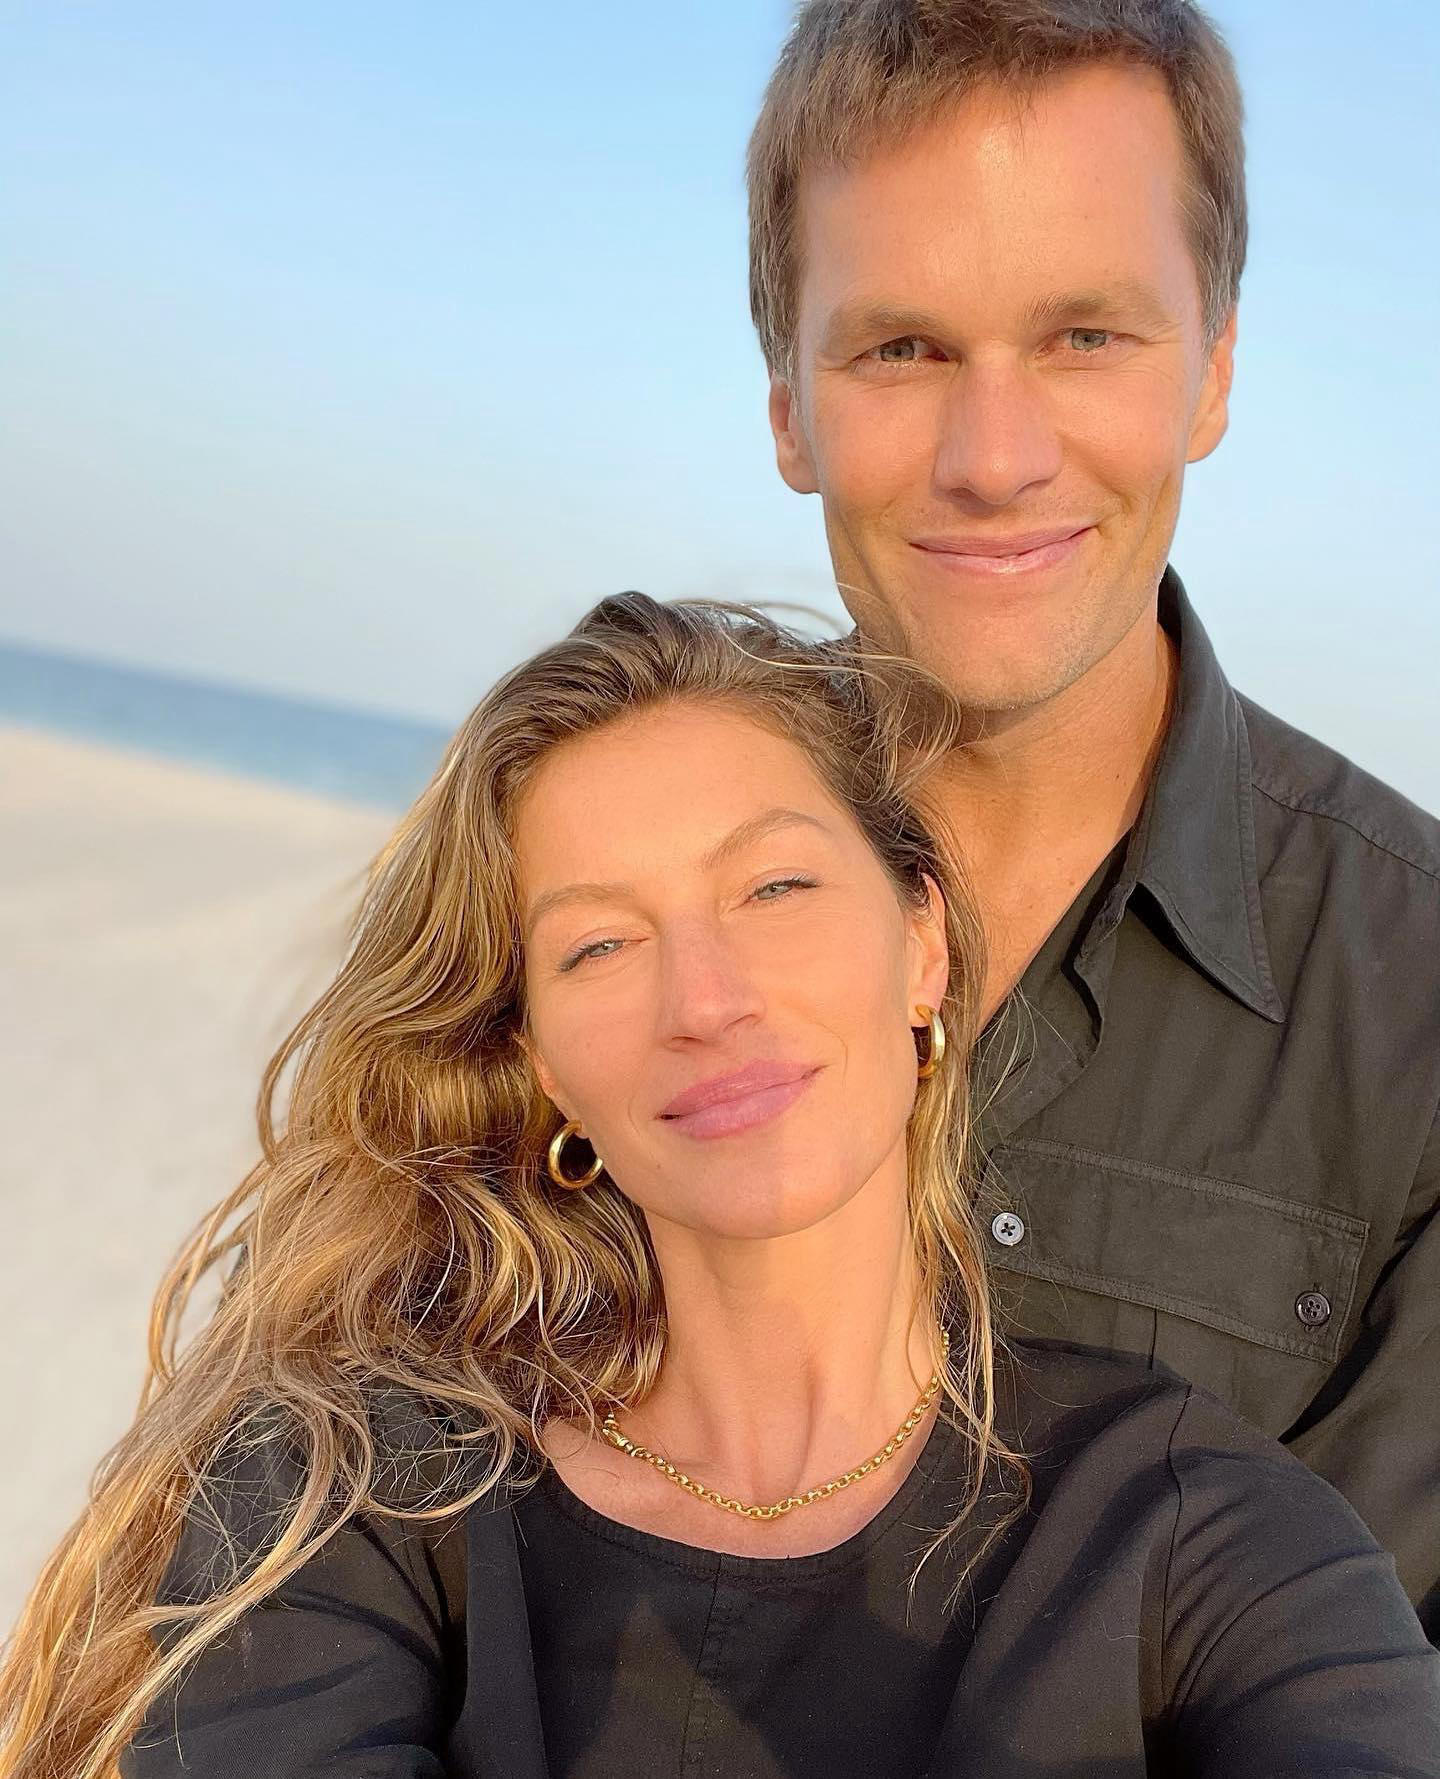 image  1 Entertainment Tonight - Looks like there's a flag on the play for Tom Brady and Gisele Bündchen